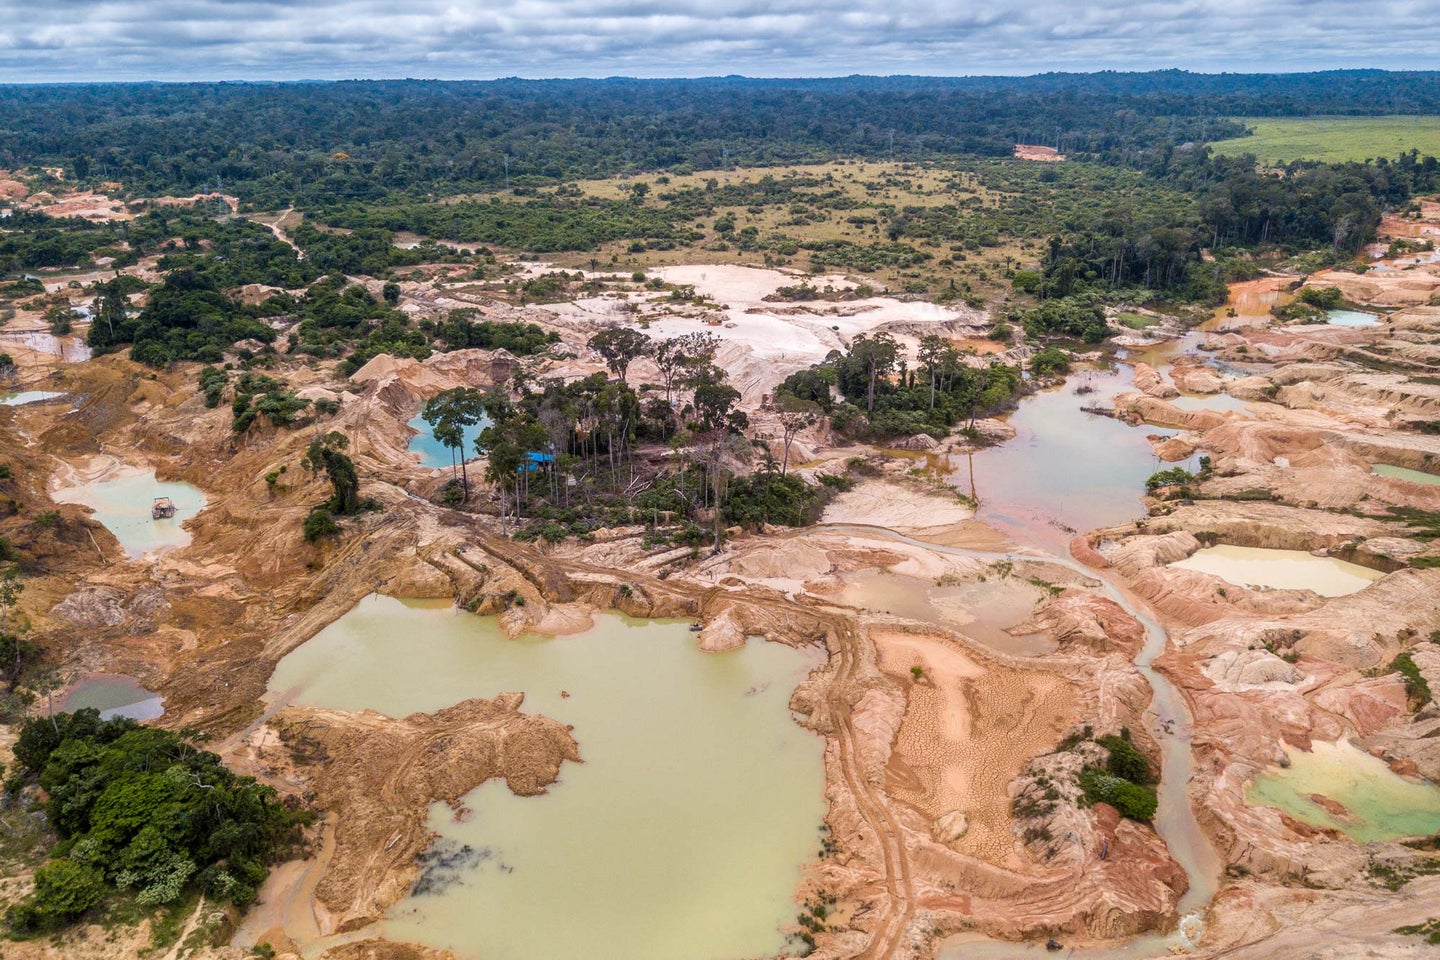 Aerial view of deforested area of the Amazon rainforest